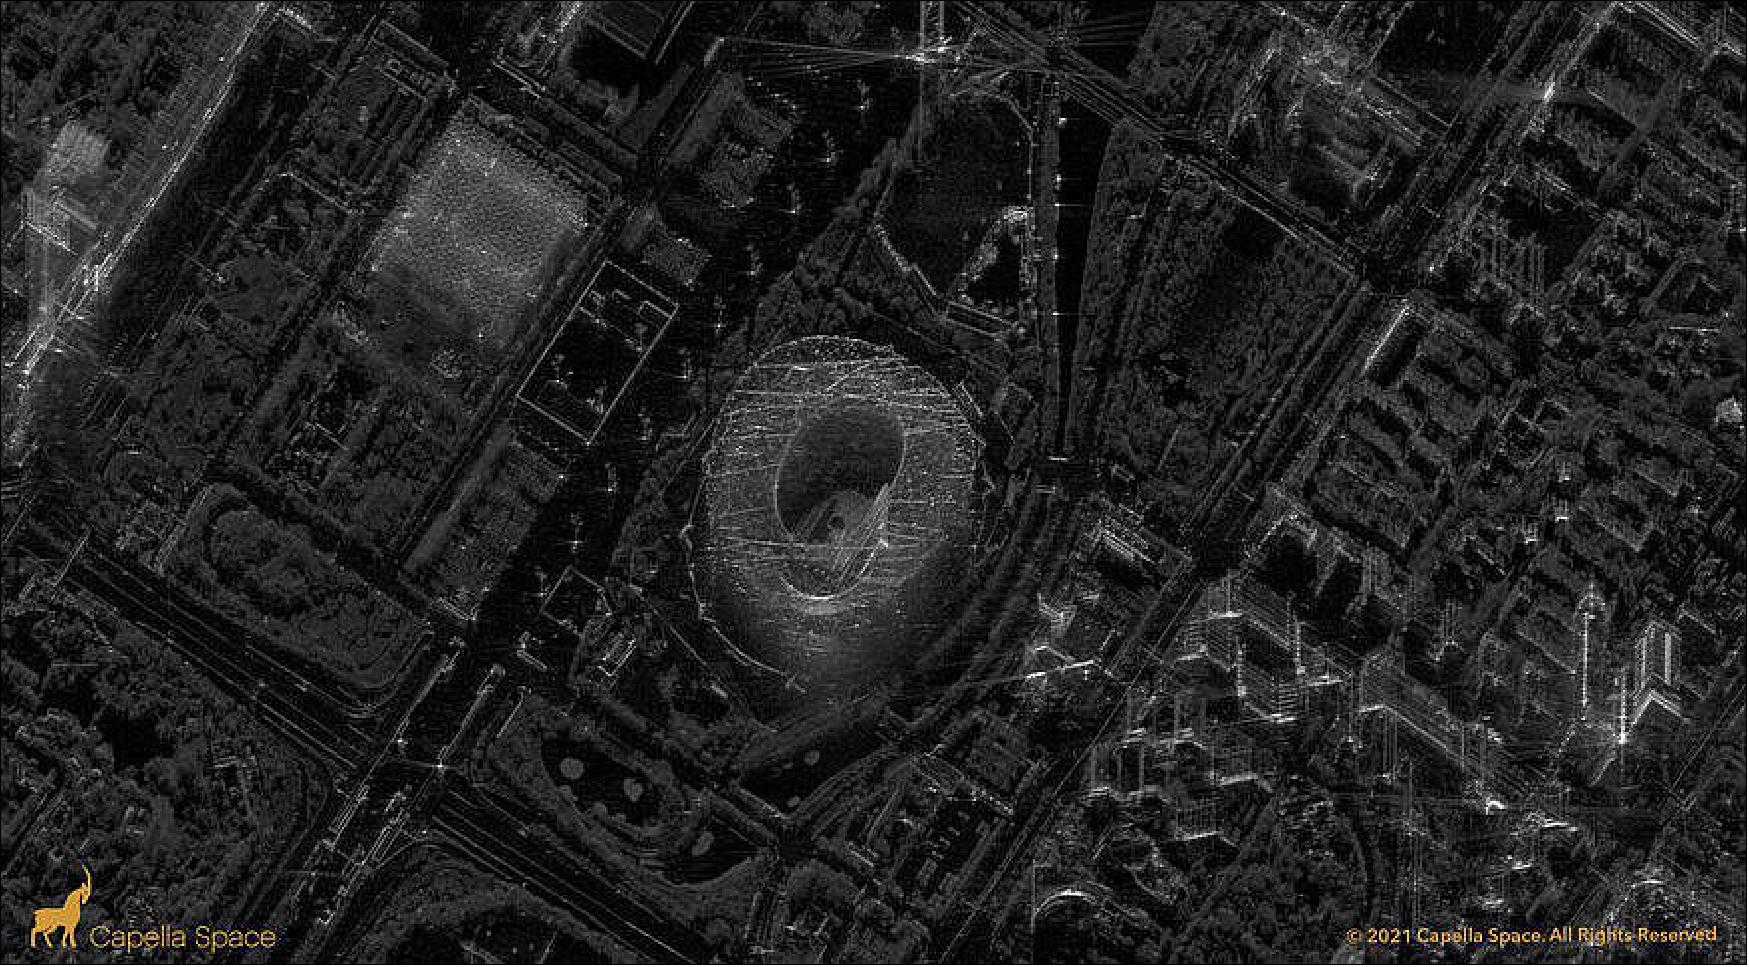 Figure 10: Capella Space synthetic-aperture radar image of the Chinese National Stadium, also known as the Bird's Nest, the site of opening ceremonies for the 2022 winter Olympics in China (image credit: Capella Space)